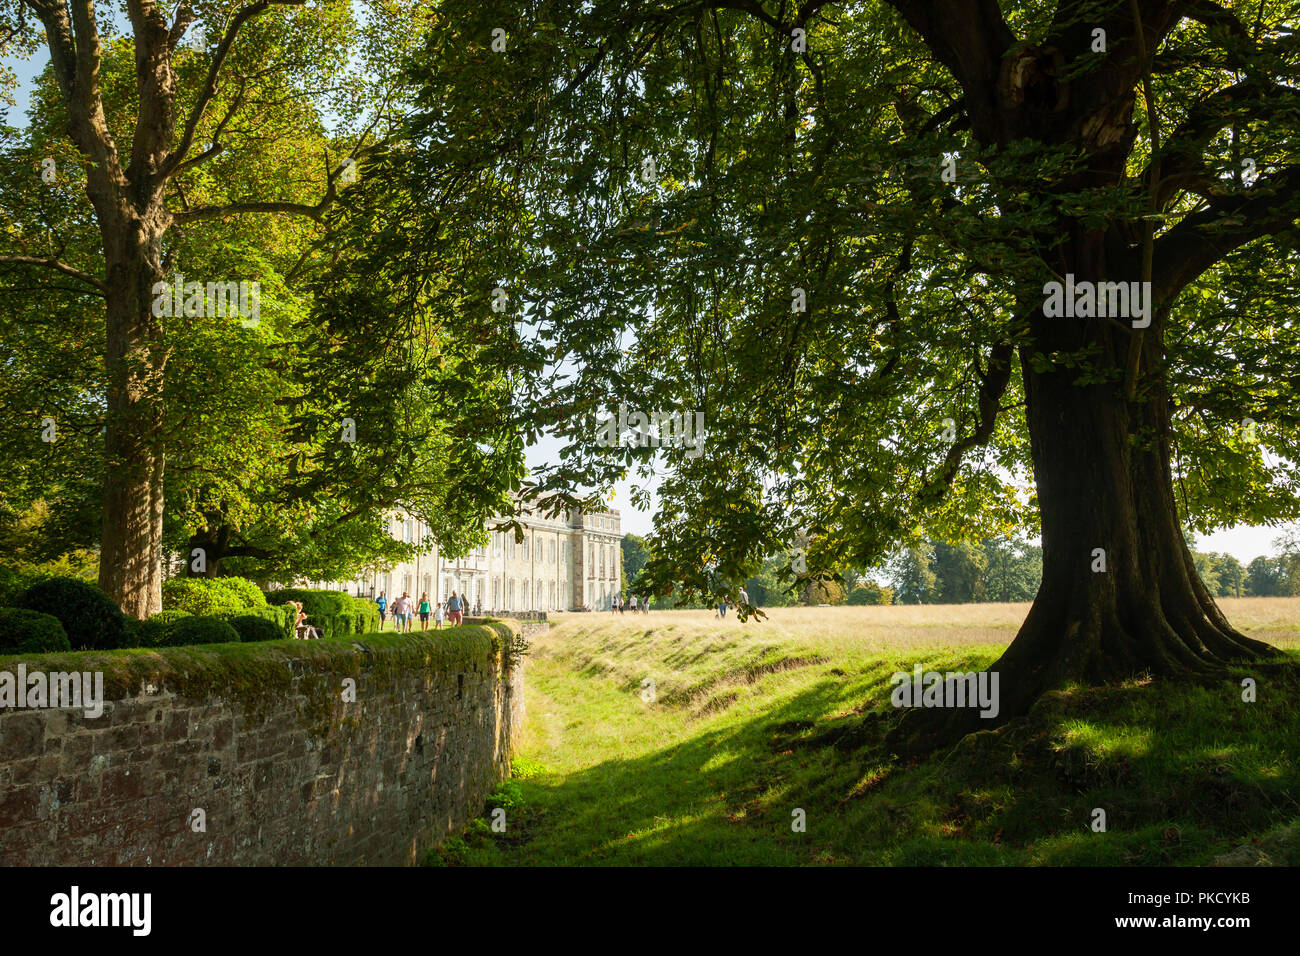 Summer afternoon in Petworth Park, West Sussex, England. Stock Photo